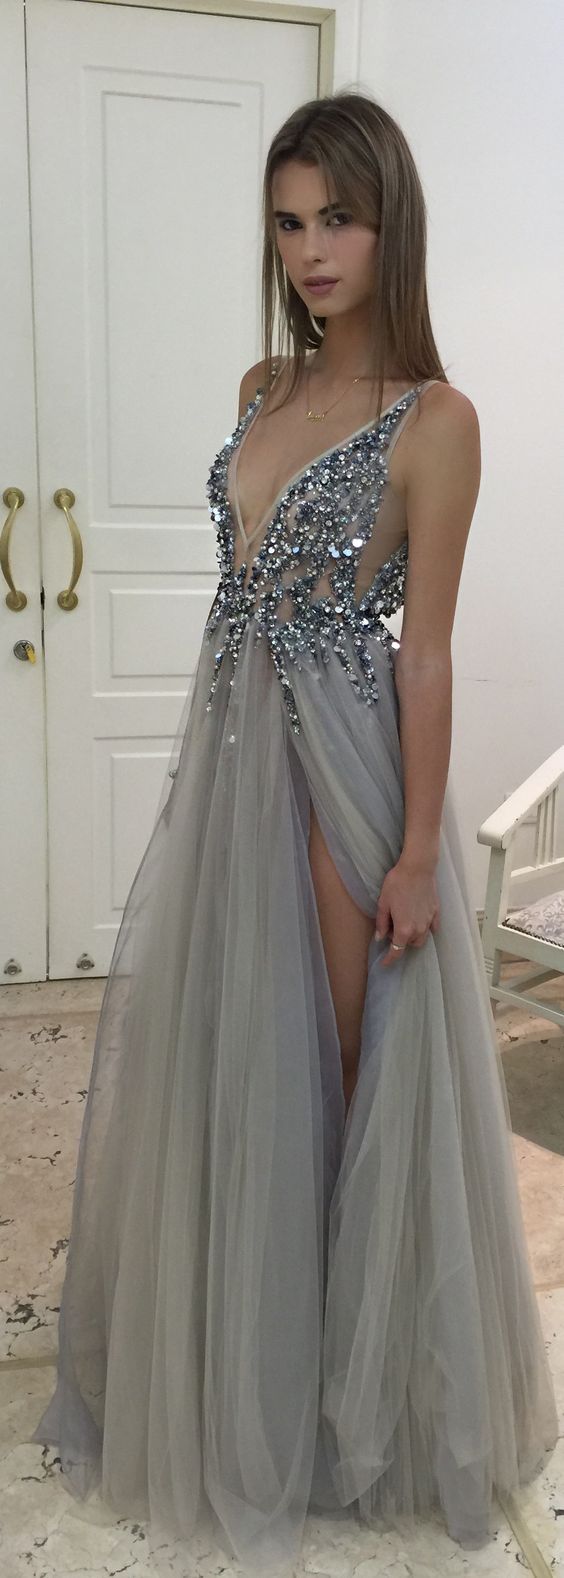 Gray Prom Dresses,beaded Prom Dress,gray Prom Dresses,formal Gown,ball Gown Evening Gowns,modest Party Dress,slit Prom Gown For Teens